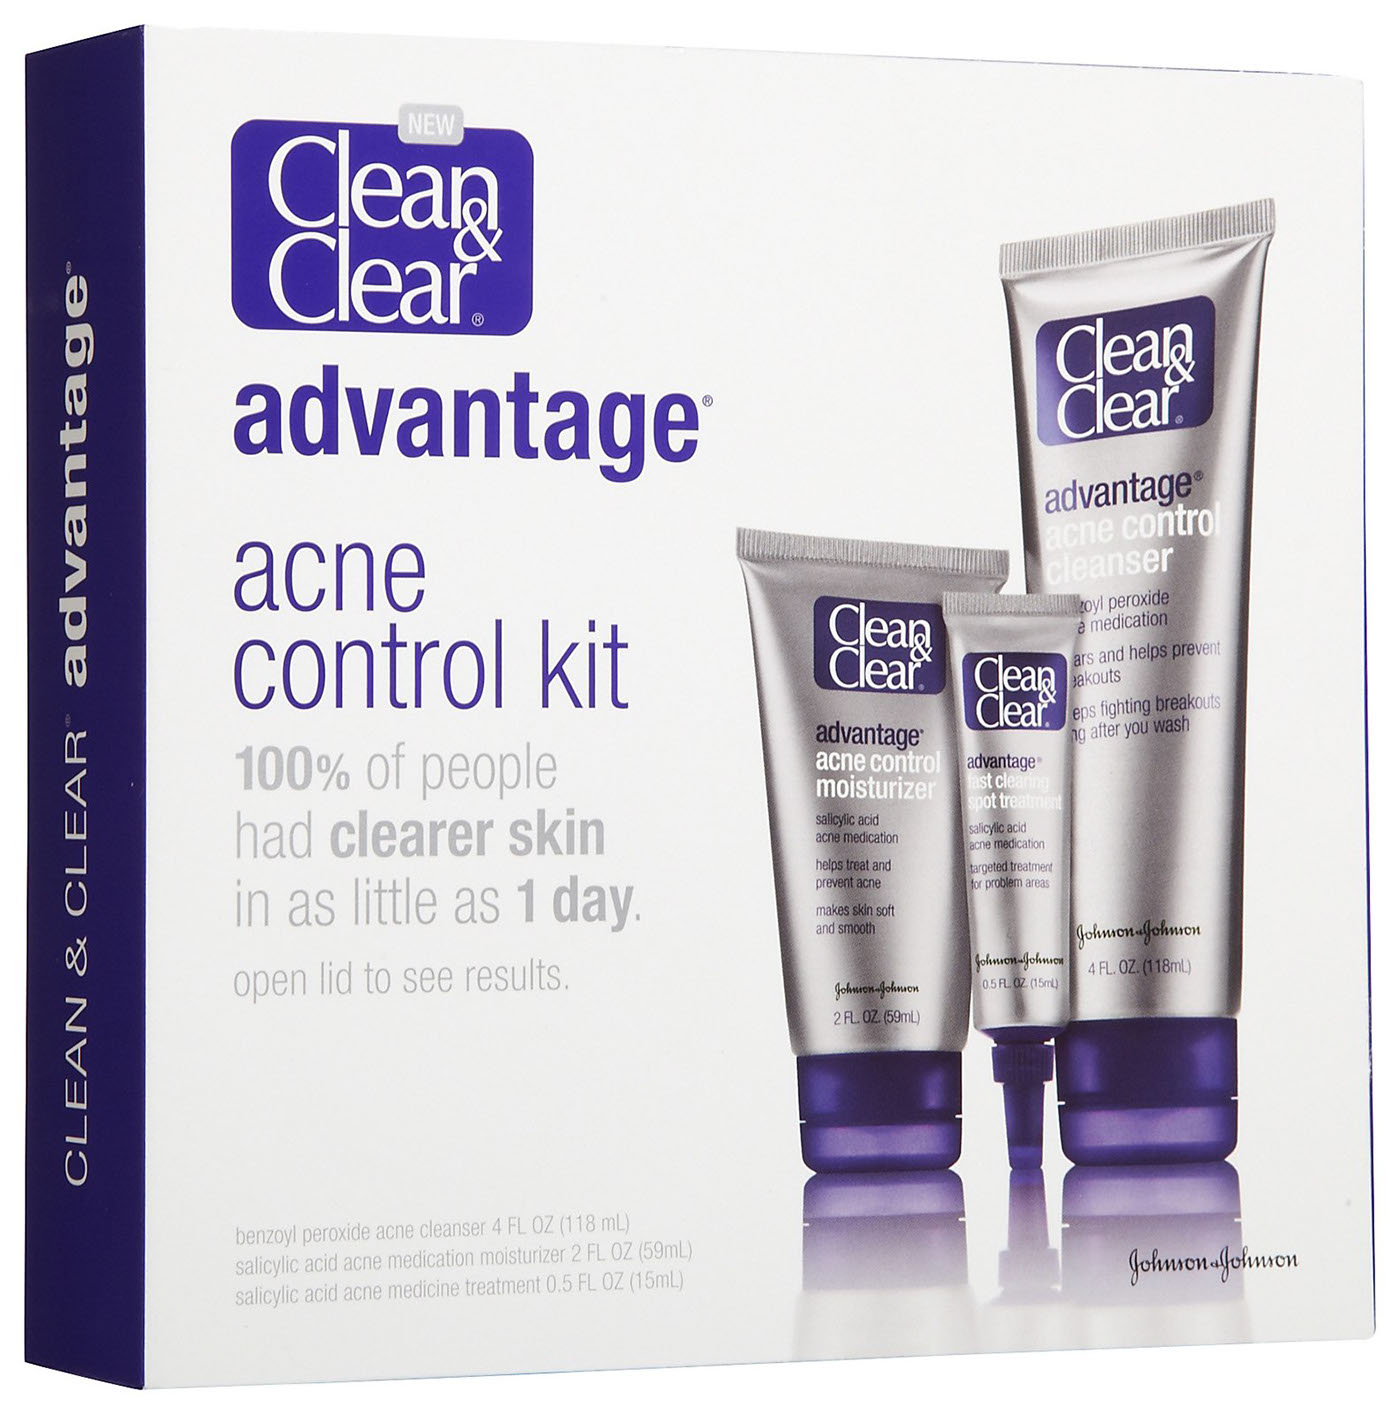 Clean & Clear, Continuous Control acne Cleanser. Clean & Clear advantage acne Control. Advantage от clean & Clear.. Skine kleare. Clear control